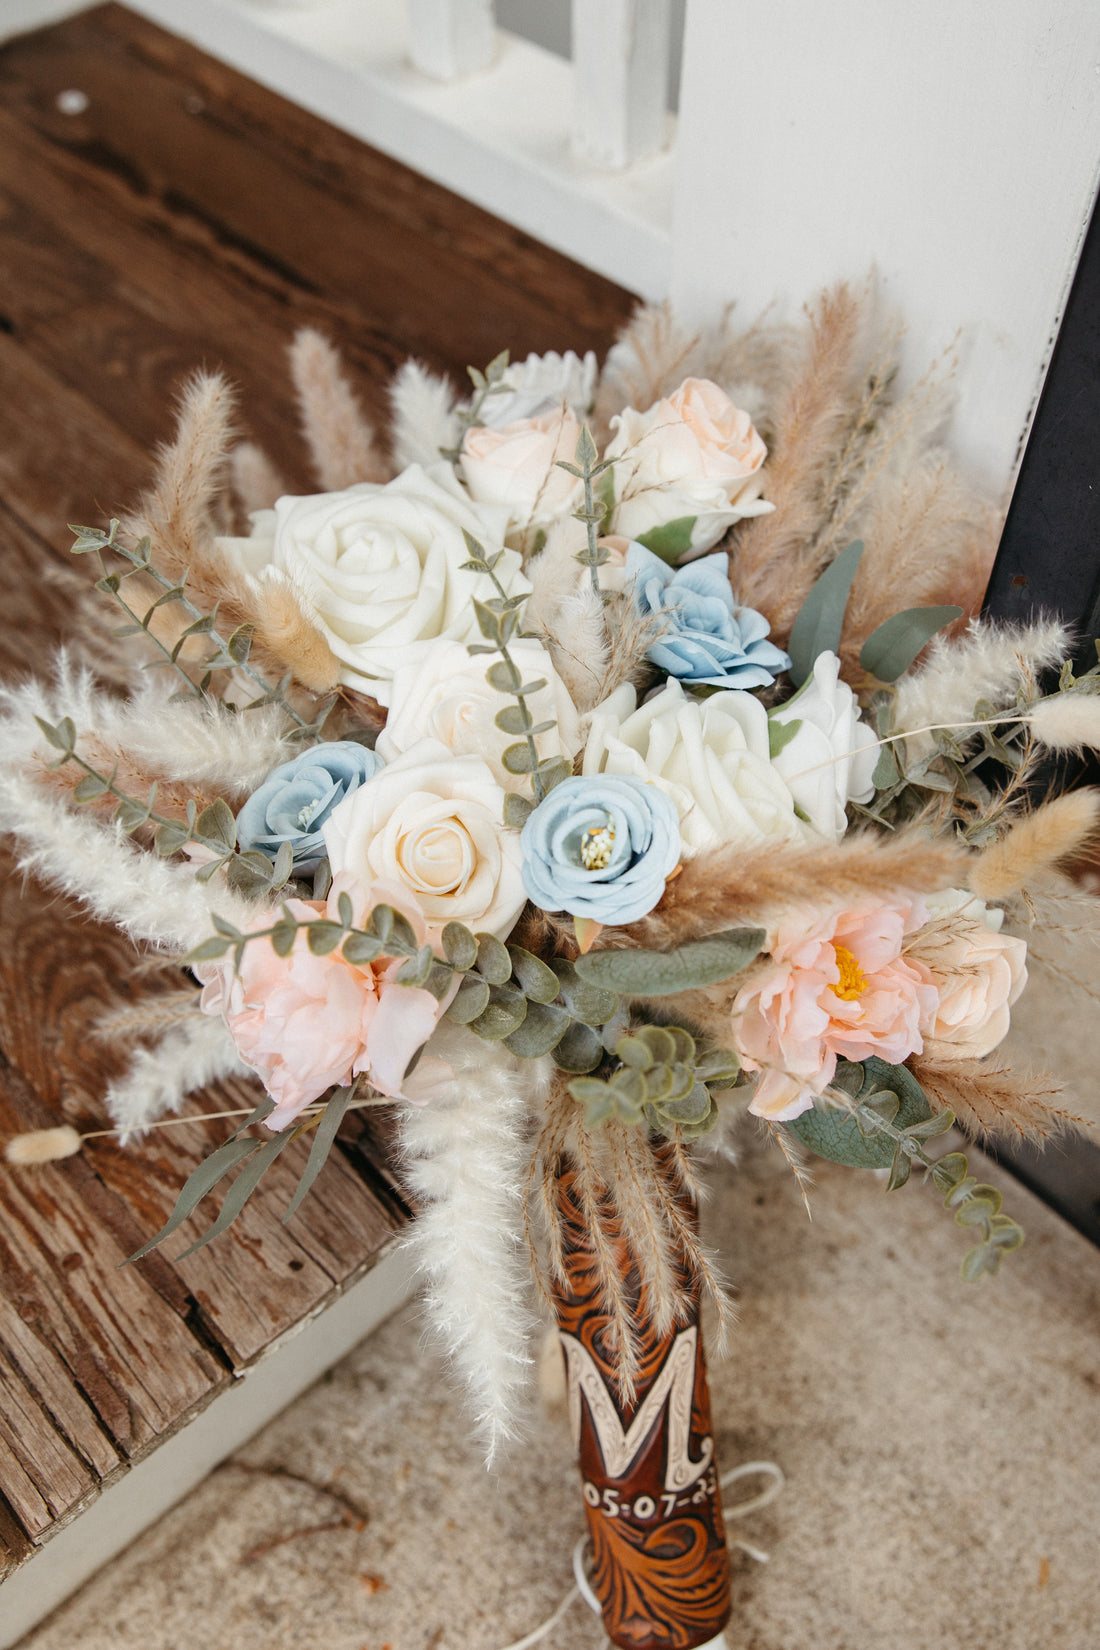 Save thousands and make your own wedding florals